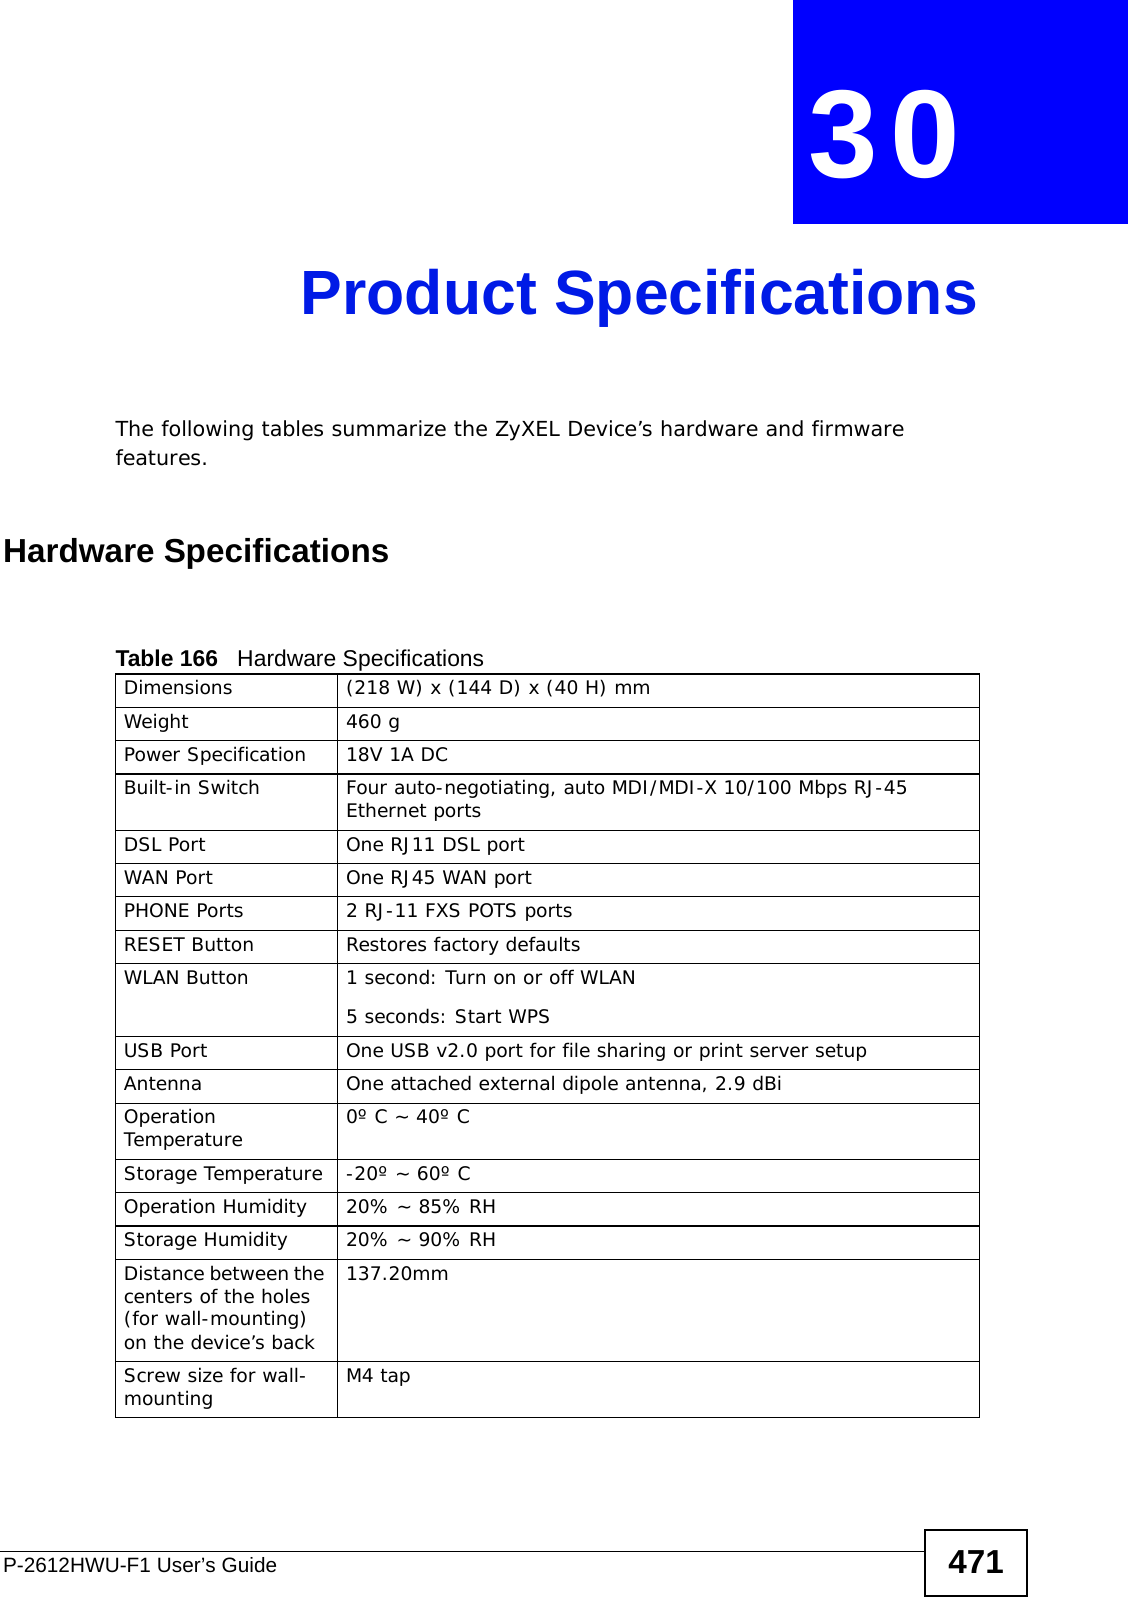 P-2612HWU-F1 User’s Guide 471CHAPTER  30 Product SpecificationsThe following tables summarize the ZyXEL Device’s hardware and firmware features.Hardware SpecificationsTable 166   Hardware SpecificationsDimensions (218 W) x (144 D) x (40 H) mmWeight 460 gPower Specification 18V 1A DCBuilt-in Switch Four auto-negotiating, auto MDI/MDI-X 10/100 Mbps RJ-45 Ethernet portsDSL Port One RJ11 DSL portWAN Port One RJ45 WAN portPHONE Ports 2 RJ-11 FXS POTS portsRESET Button Restores factory defaultsWLAN Button 1 second: Turn on or off WLAN5 seconds: Start WPSUSB Port One USB v2.0 port for file sharing or print server setupAntenna One attached external dipole antenna, 2.9 dBiOperation Temperature 0º C ~ 40º CStorage Temperature -20º ~ 60º COperation Humidity 20% ~ 85% RHStorage Humidity 20% ~ 90% RHDistance between the centers of the holes (for wall-mounting) on the device’s back137.20mmScrew size for wall-mounting M4 tap